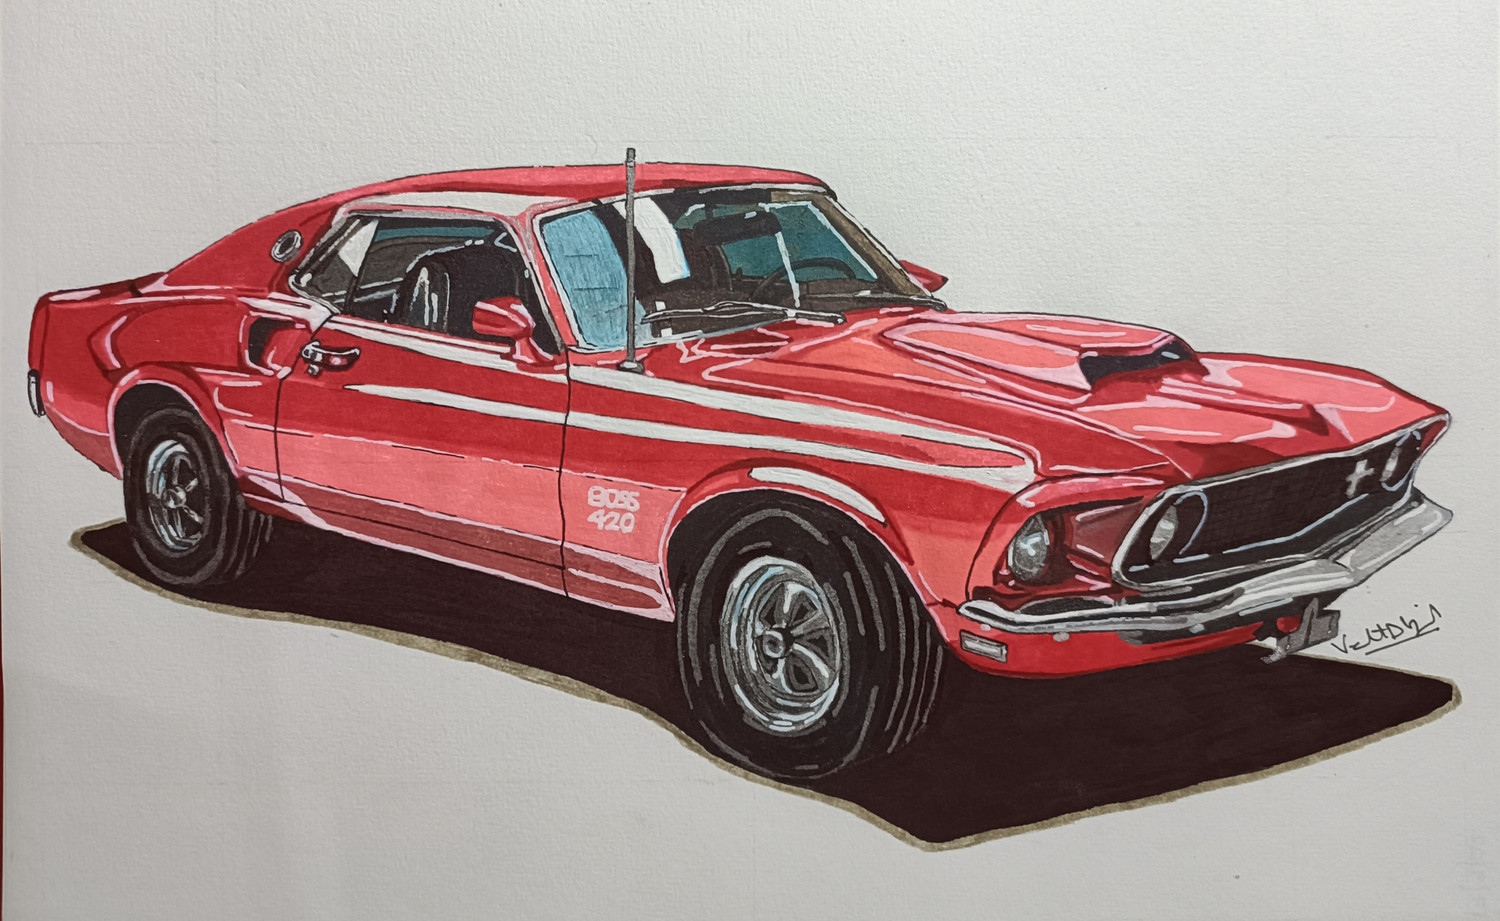 Downton Abbey Drawing, Classic Car, 1910s Car, Vintage Car, Classic  Automobile, Red Car Painting, Downton Abbey Gift, Wall Art, Office Decor -  Etsy India